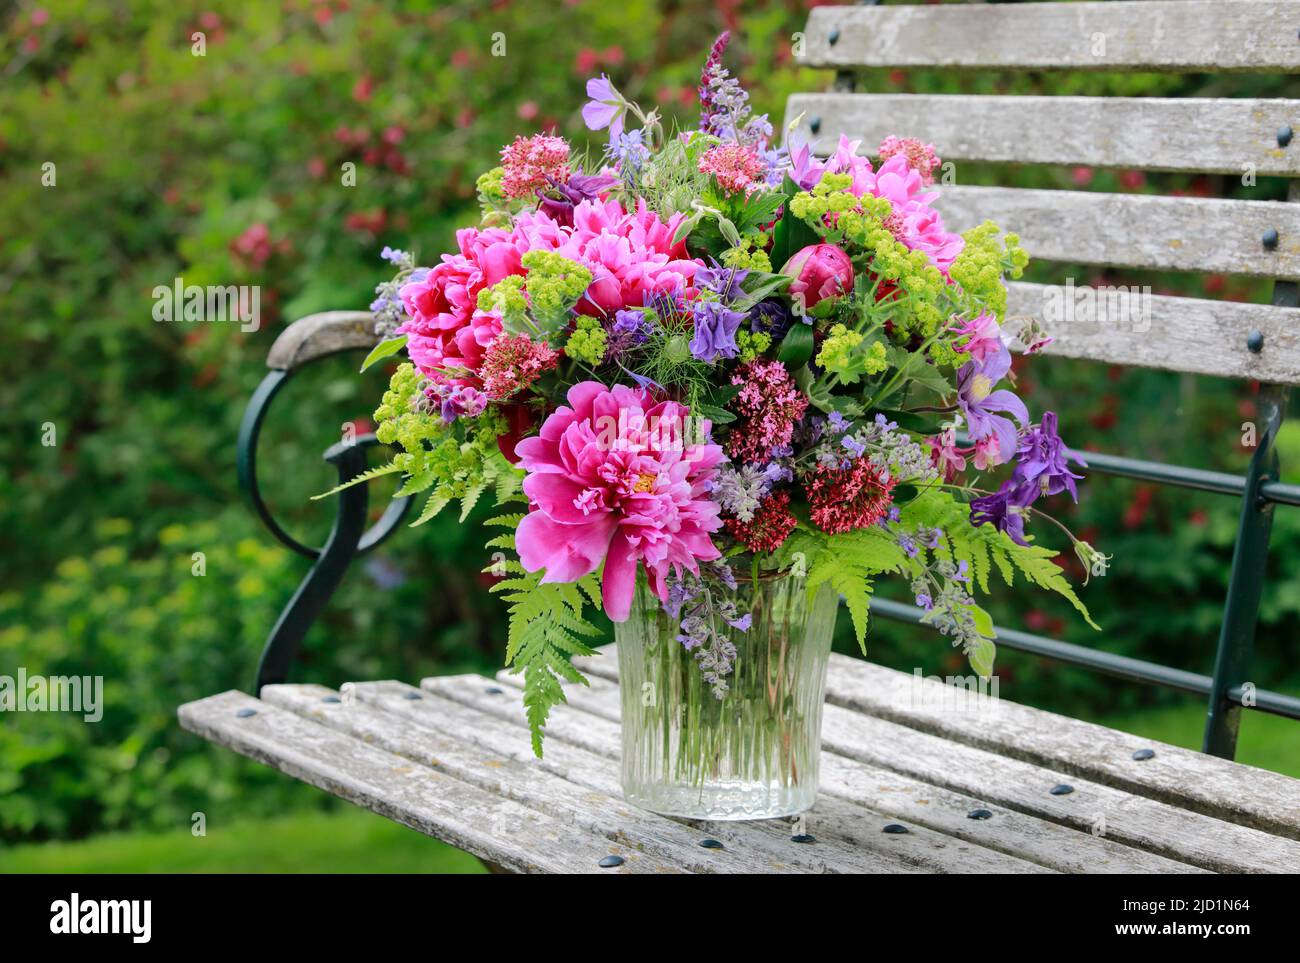 Colourful bouquet in red, pink and violet shades with peonies and columbines, stands in glass vase on decorative wooden garden bench Stock Photo